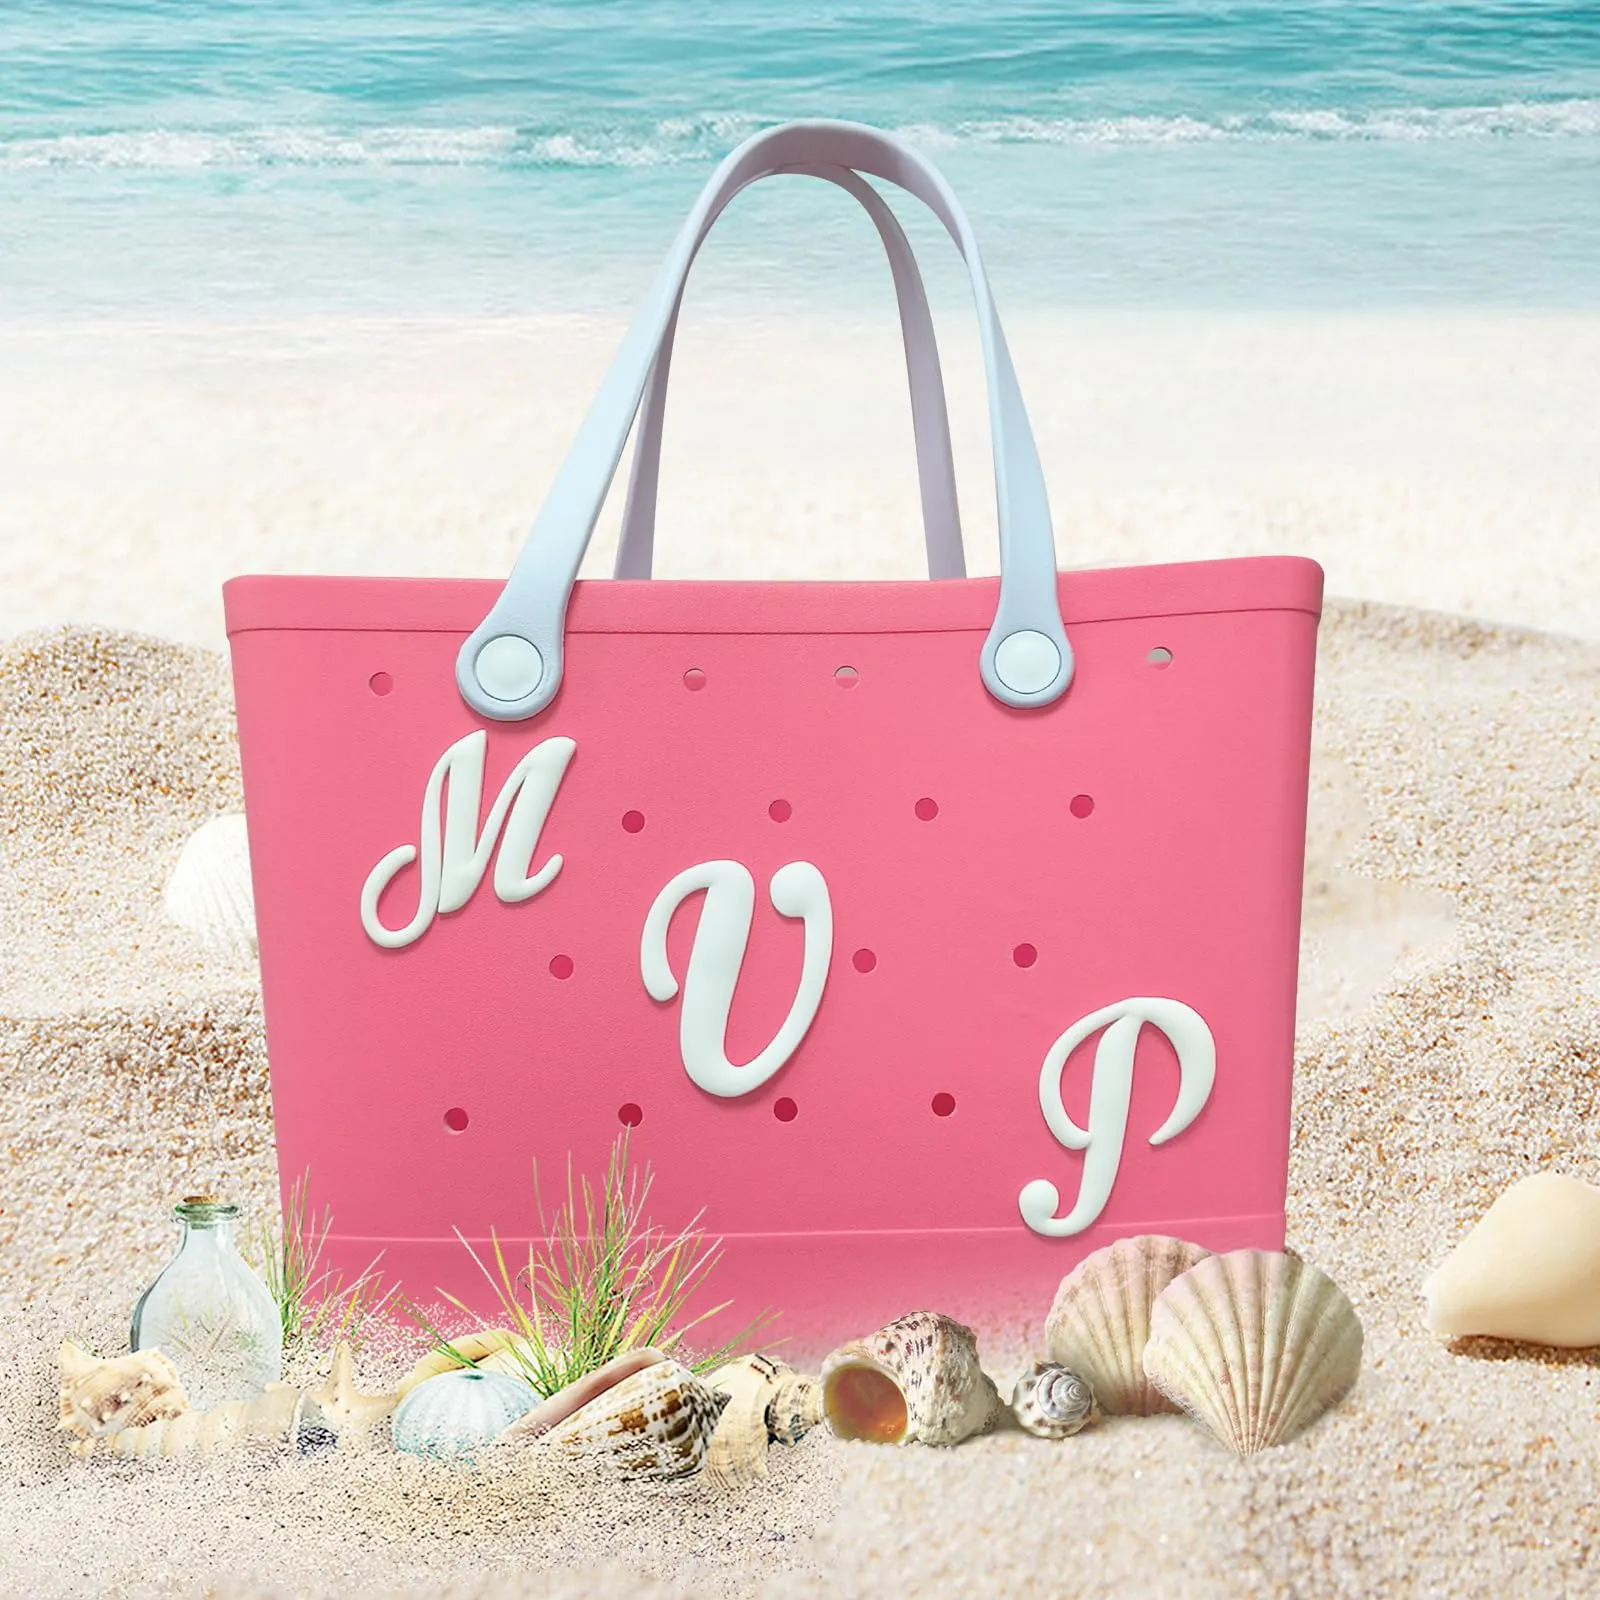 bag charms compatible with bogg bag accessories insert decorative alphabet lettering for bogg bag personalize your beach tote rubber beach bag accessories with alphabet letters q